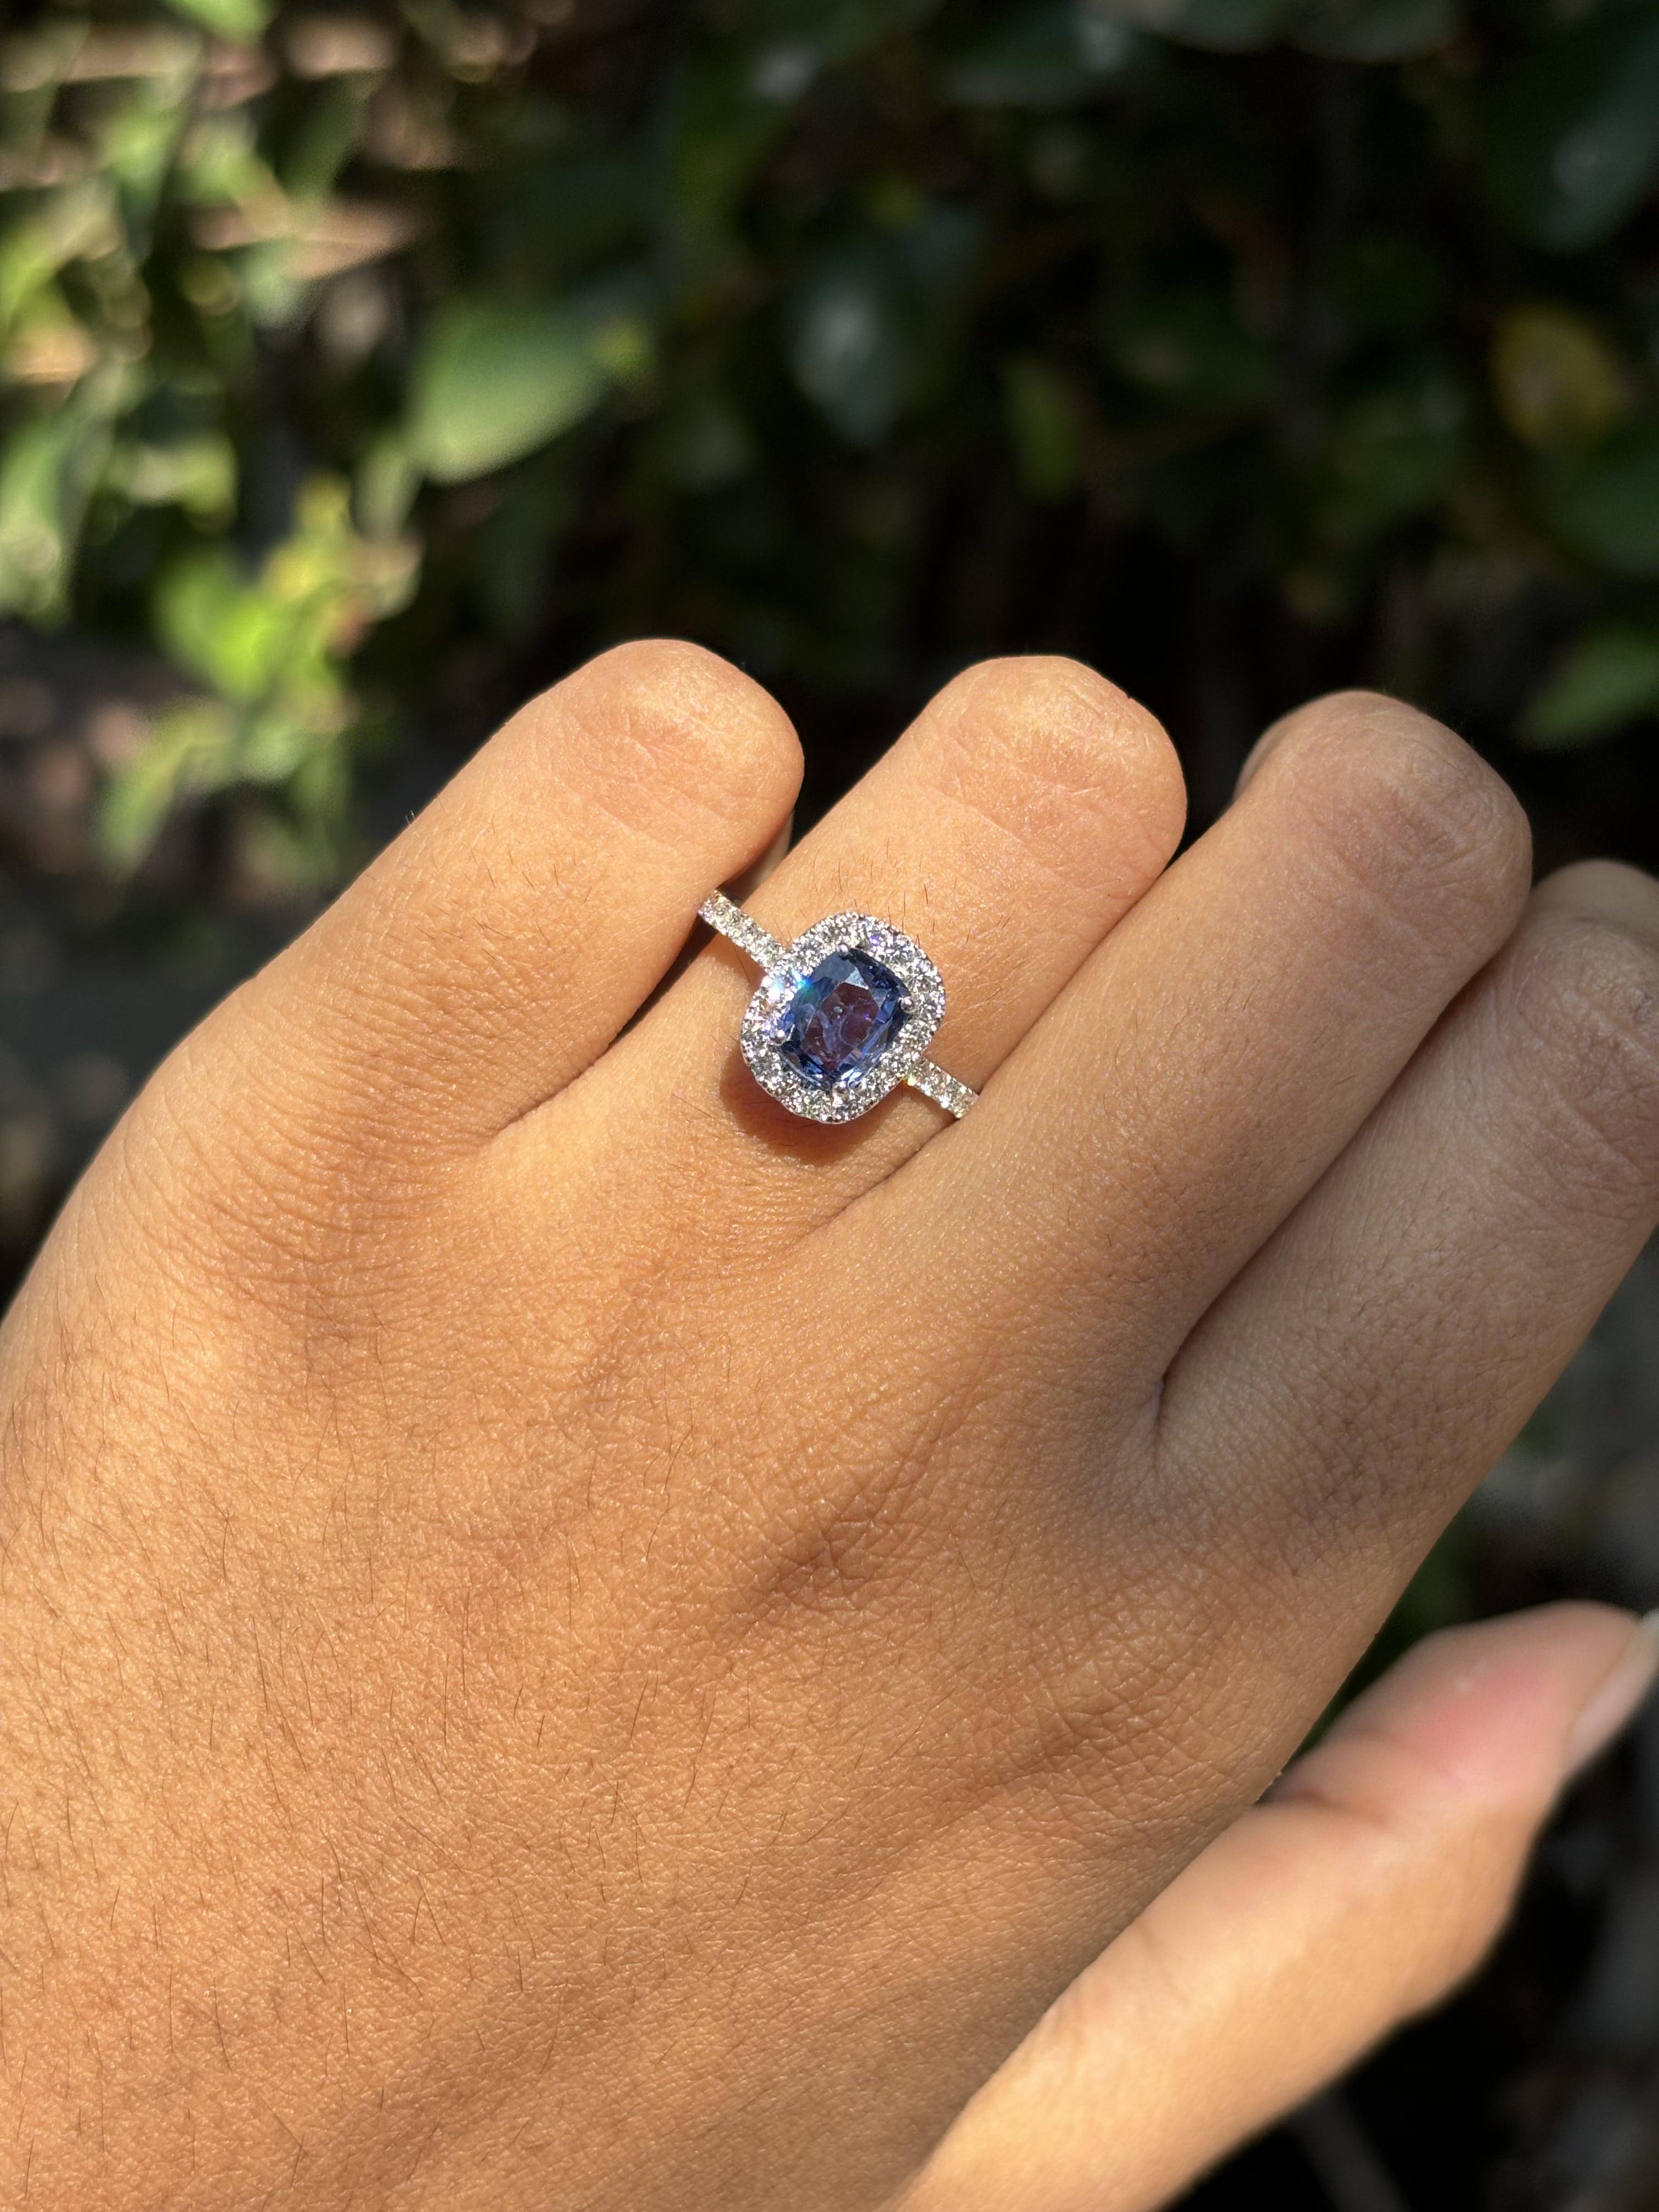 1.21 Carat Ceylon Blue Sapphire Ring with Halo Diamonds in 14K White Gold For Sale 5